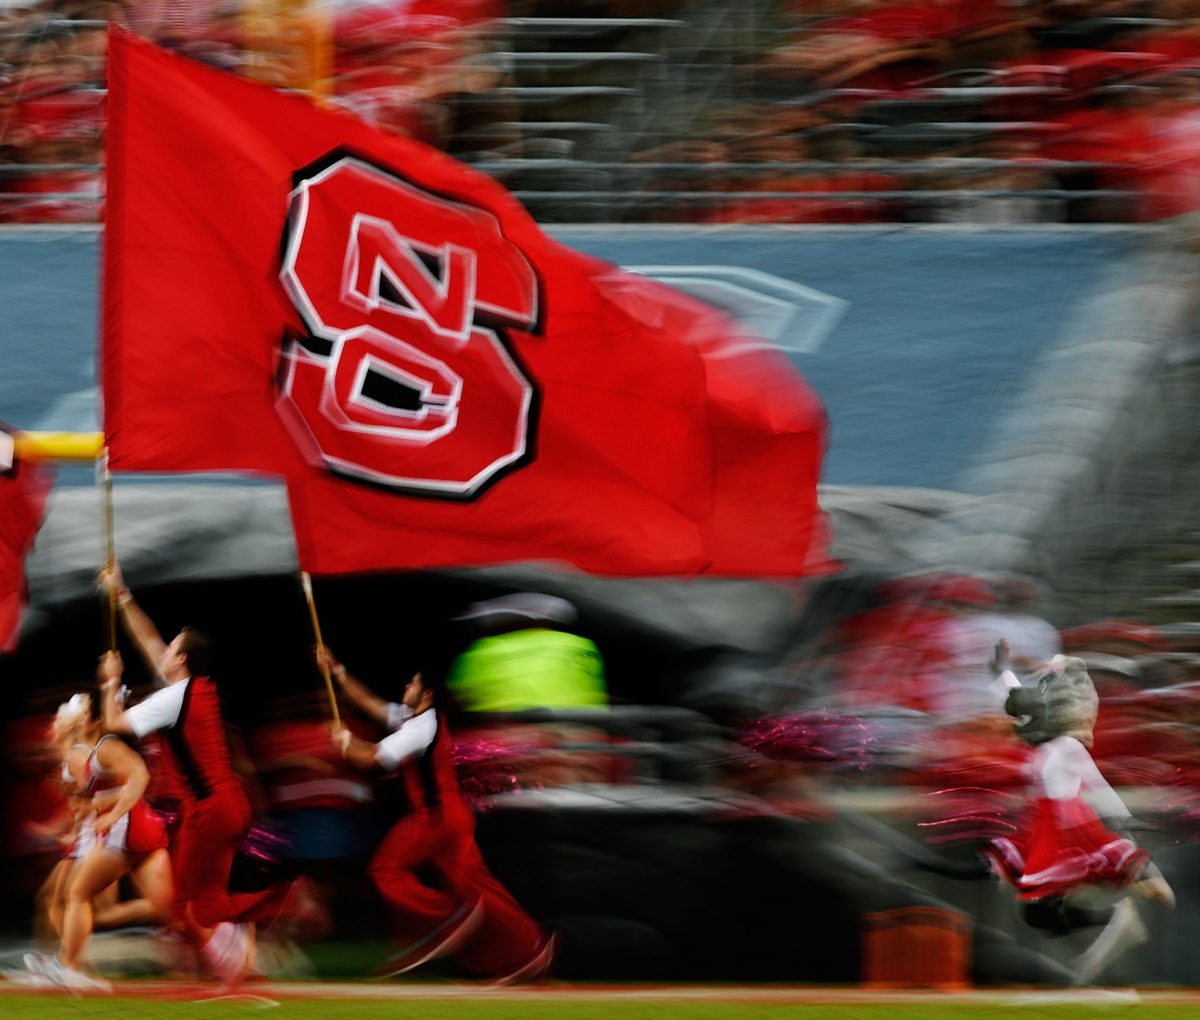 An NC State cheerleader running with a flag.